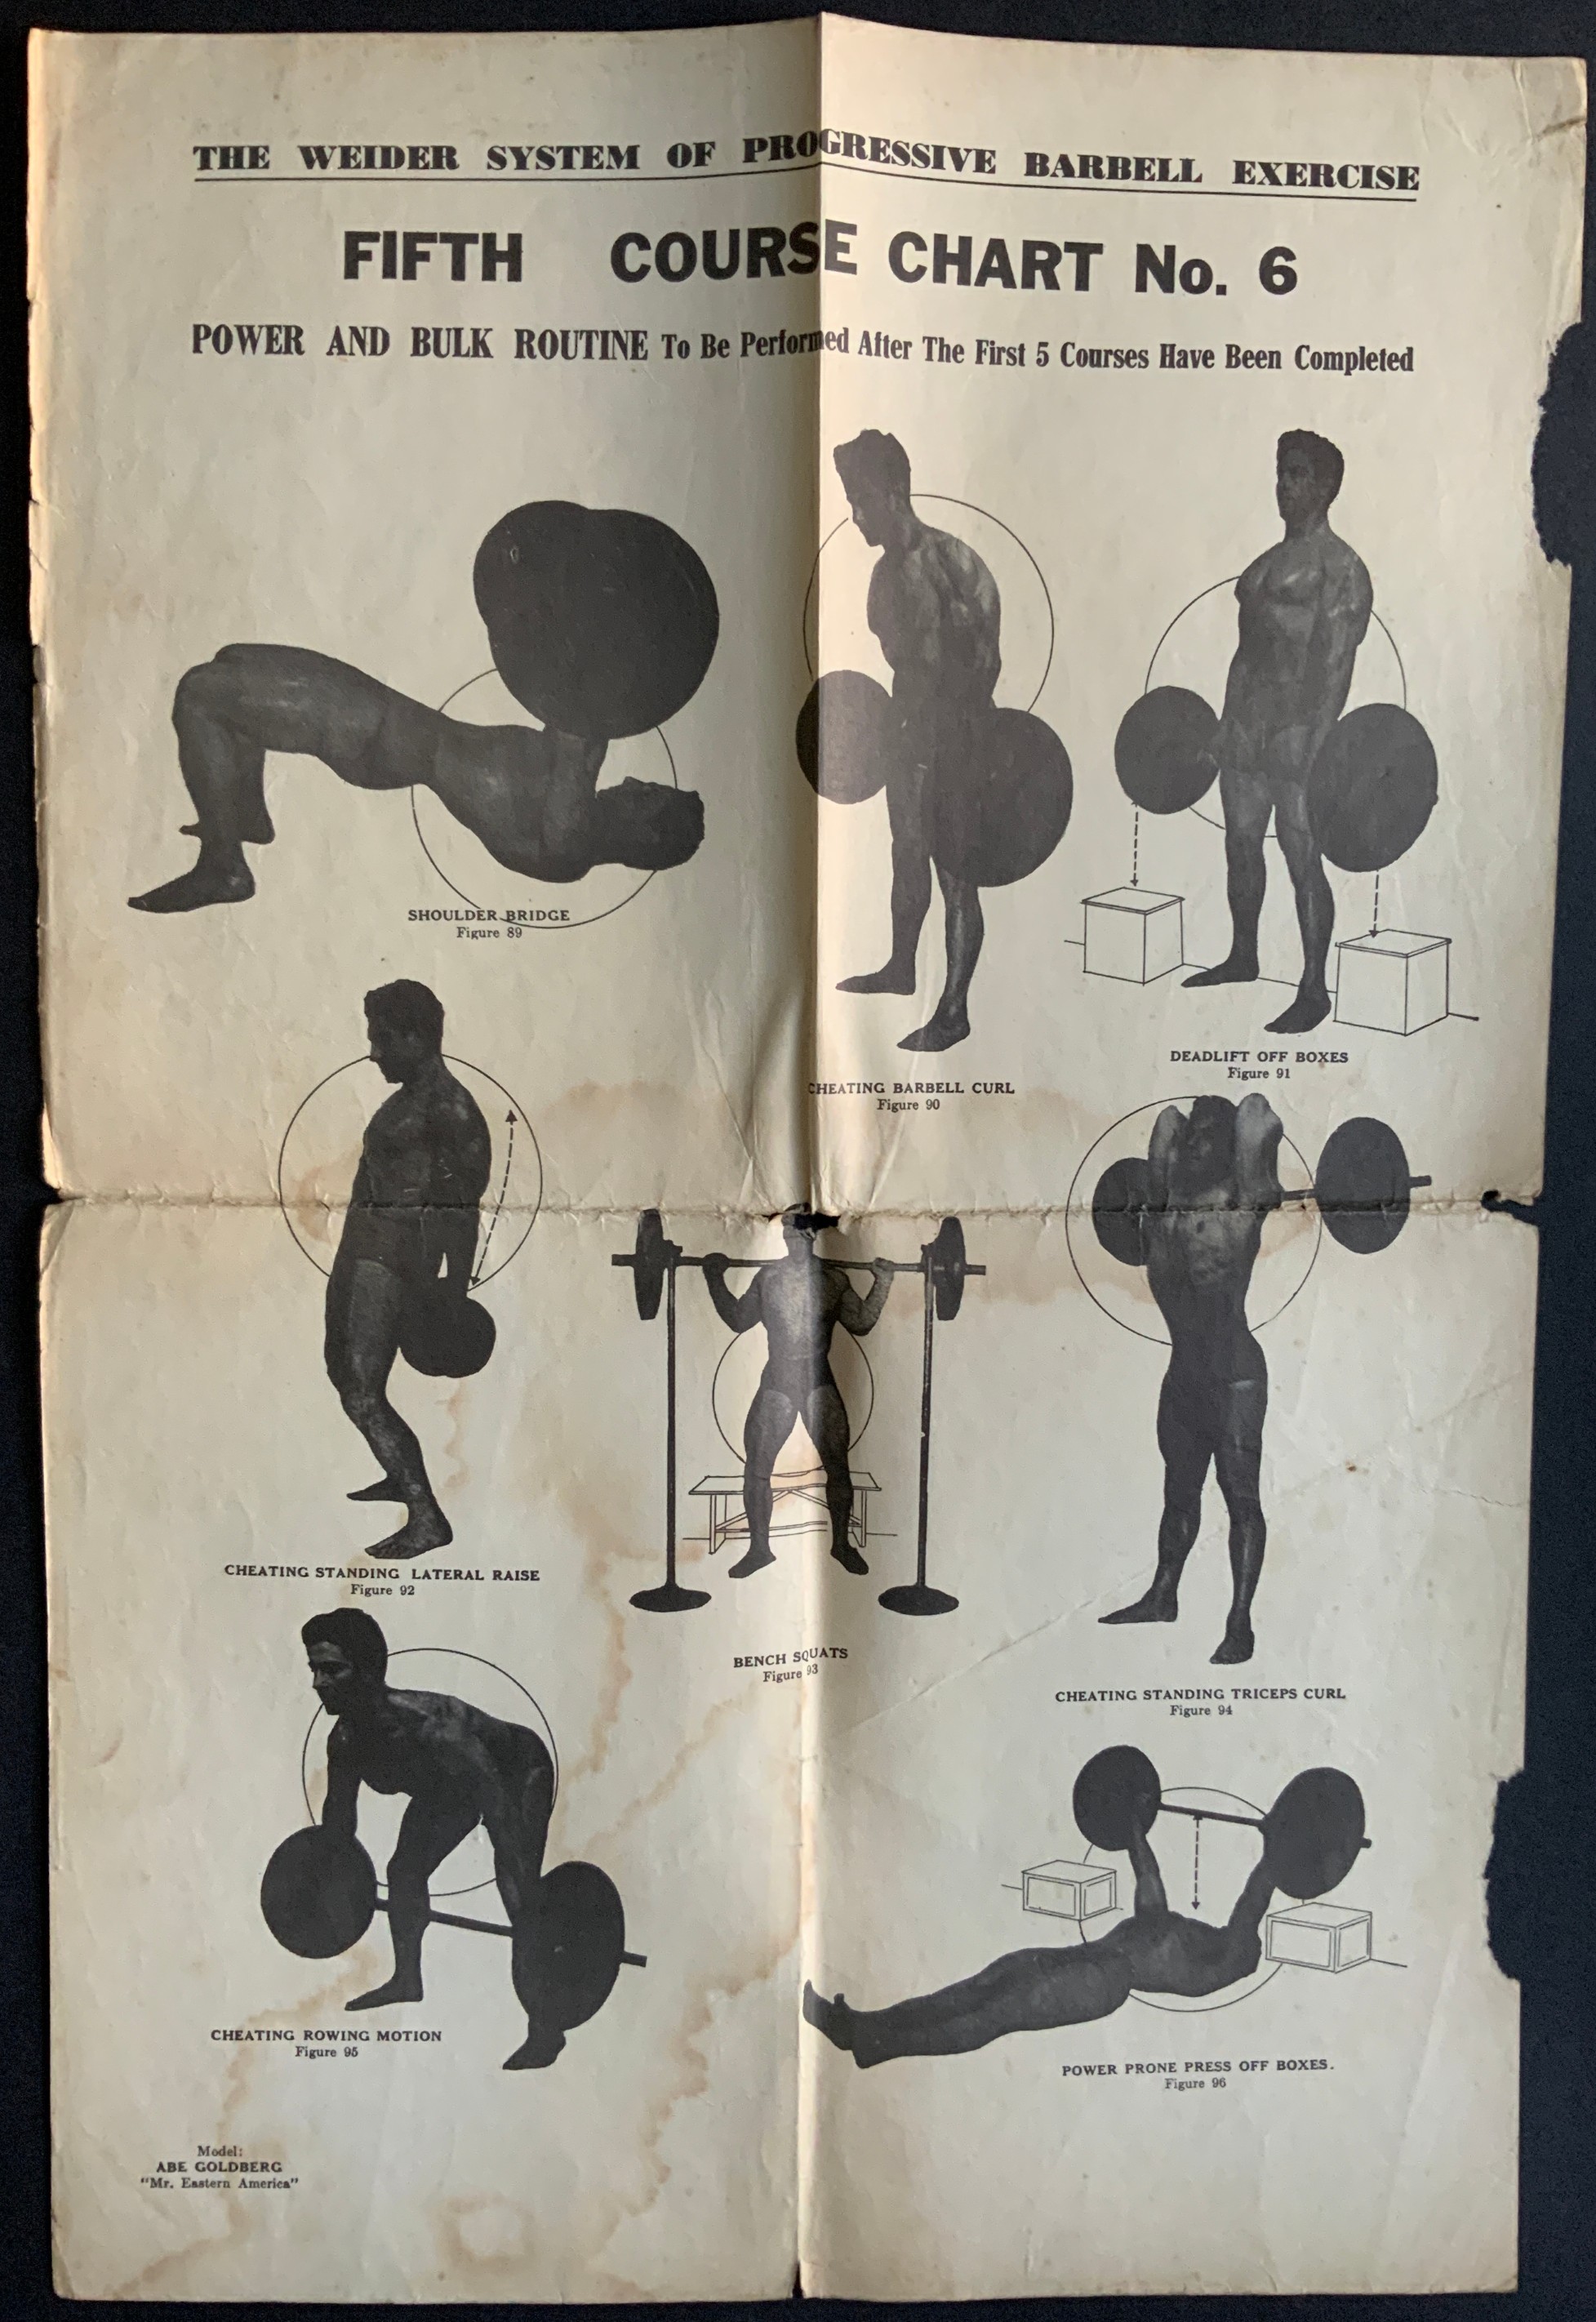 SIX THE WEIDER SYSTEM OF PROGRESSIVE BARBELL EXERCISE FIRST COURSE CHARTS - Image 6 of 6